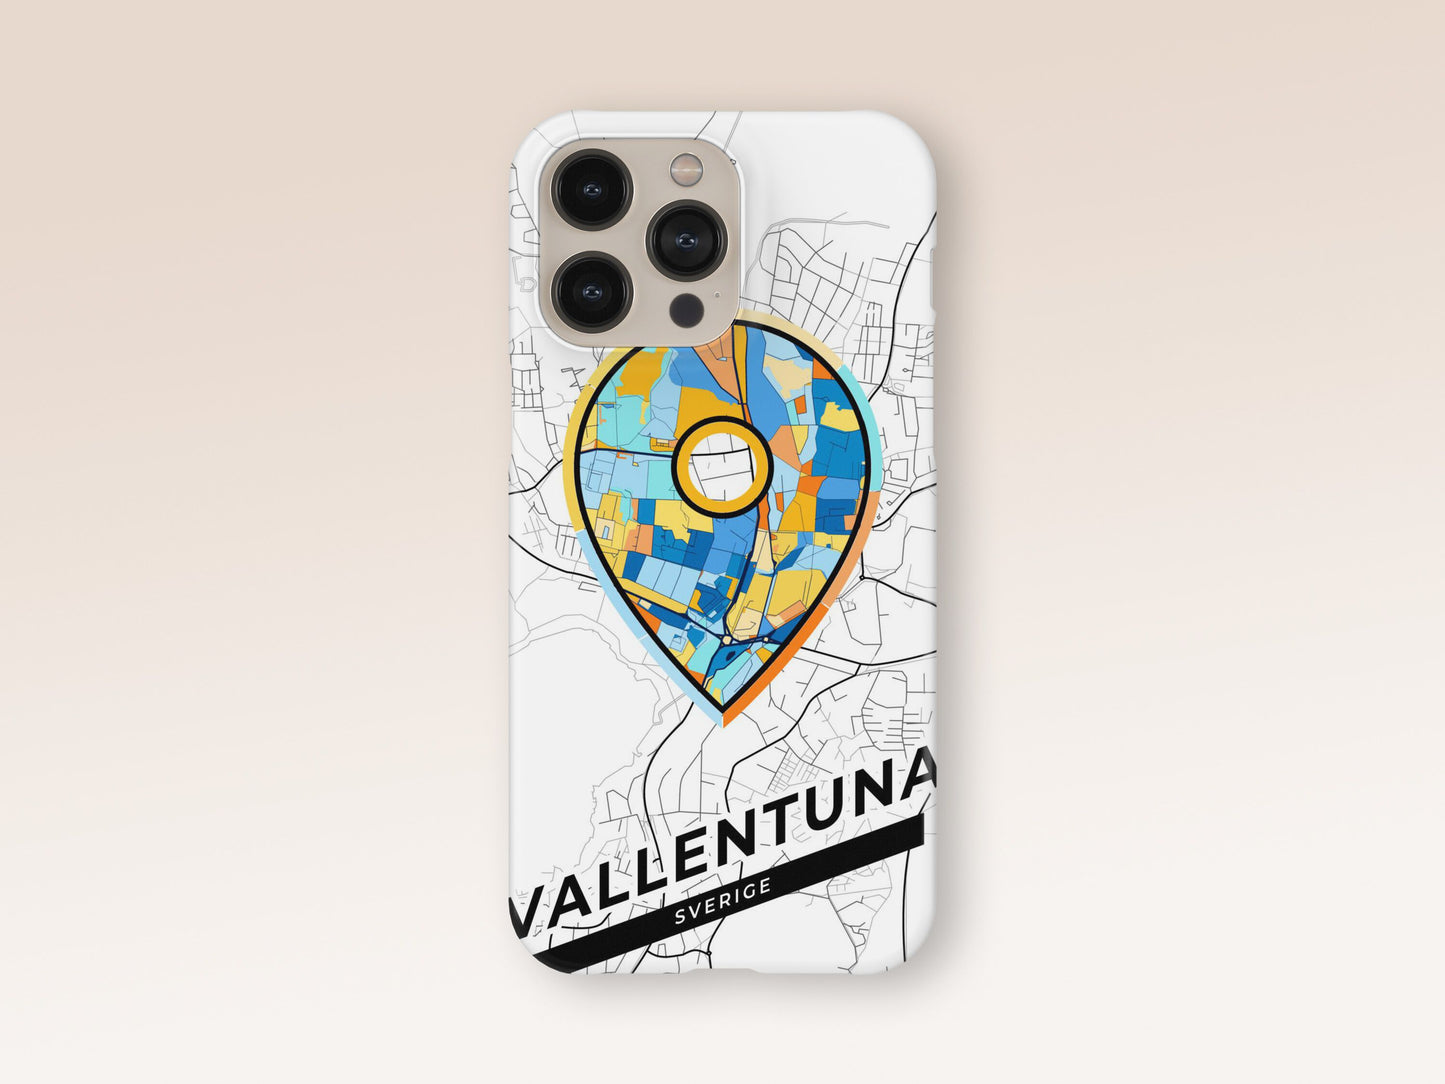 Vallentuna Sweden slim phone case with colorful icon 1